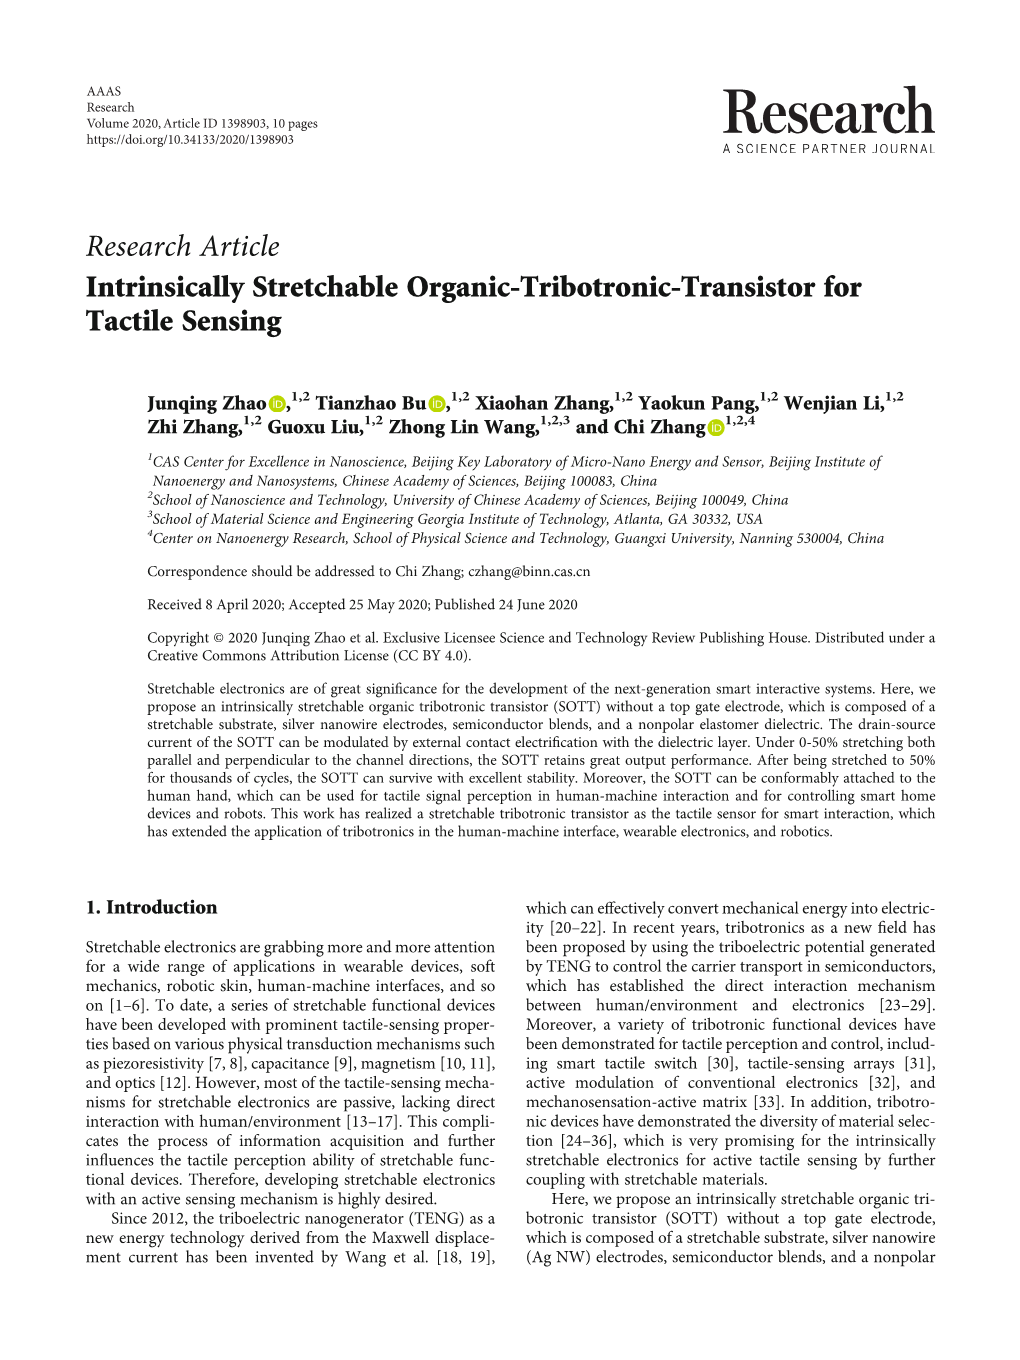 Intrinsically Stretchable Organic-Tribotronic-Transistor for Tactile Sensing